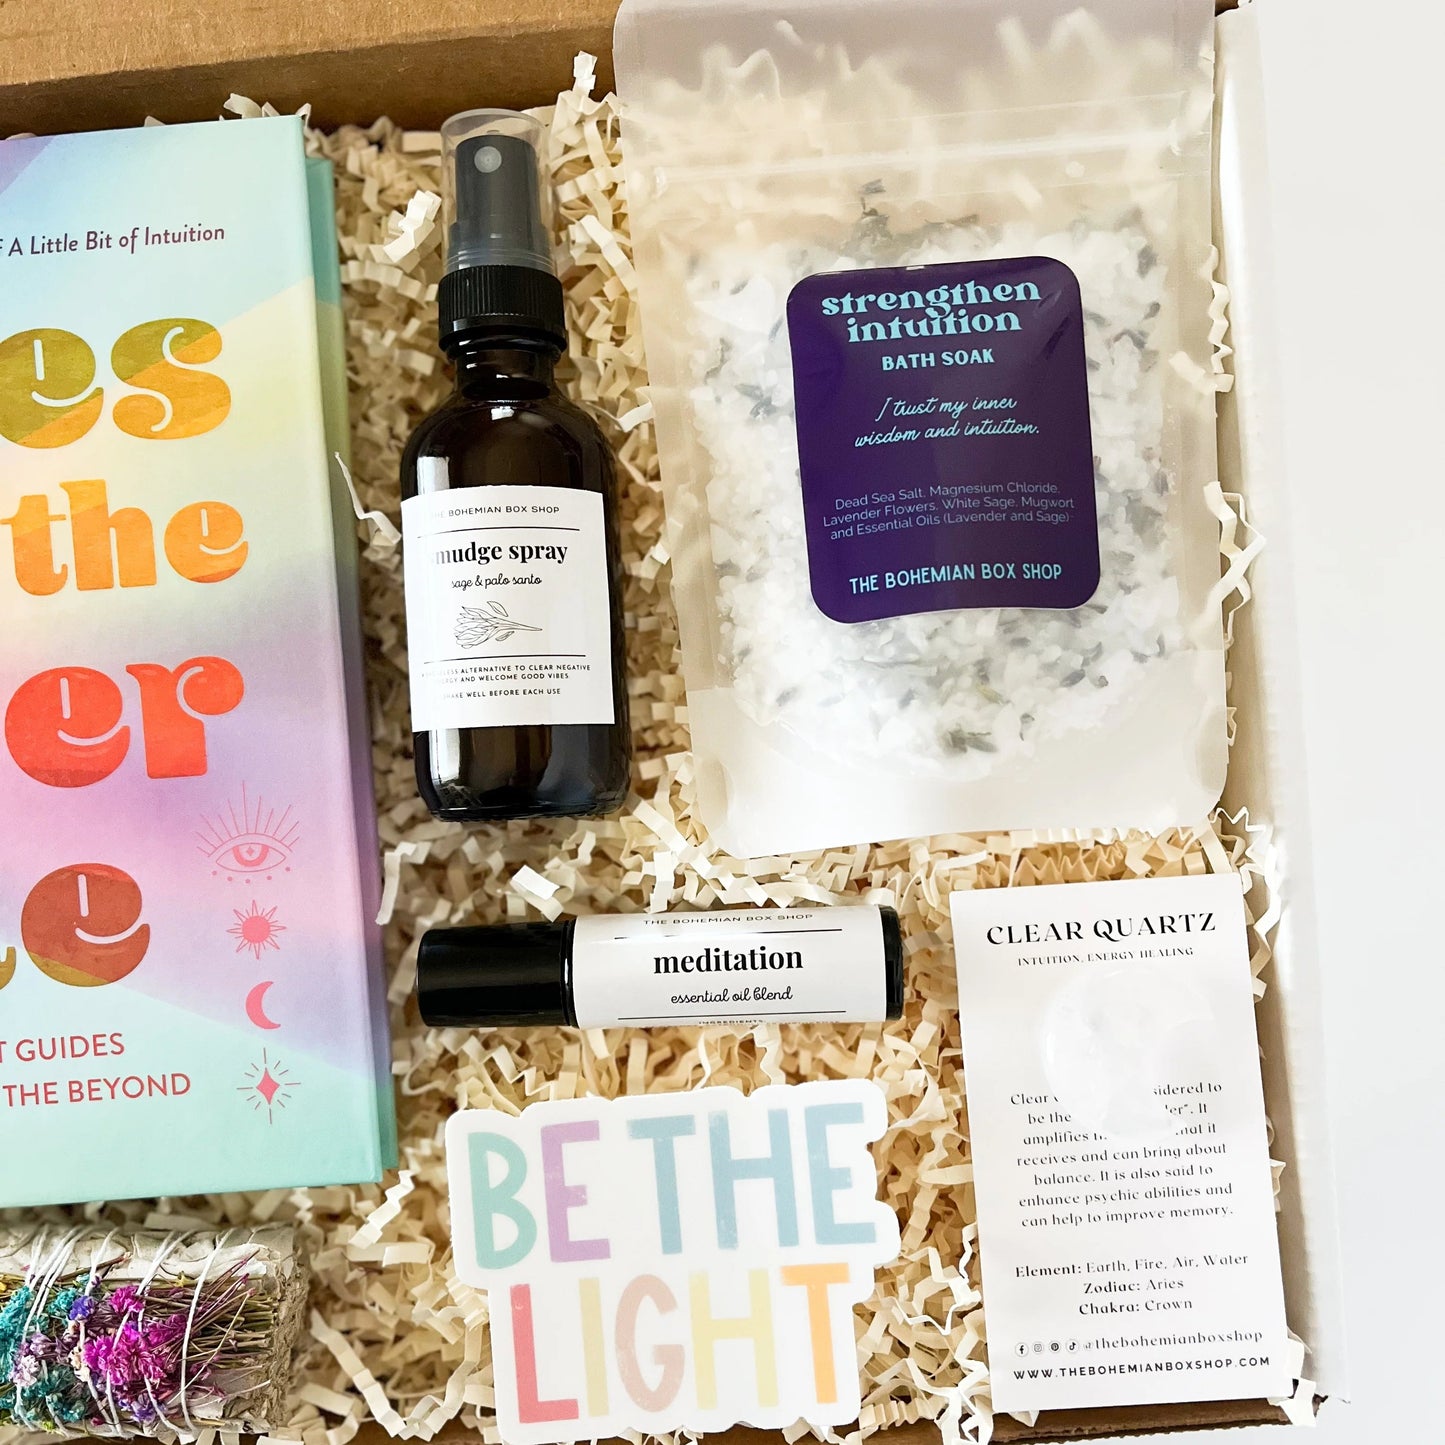 Be the light gift set. Includes vibes from the other side book, sage bundle, smudge spray, meditation roller bottle, be the light sticker, intuition bath soak, and clear quartz moon crystal. 